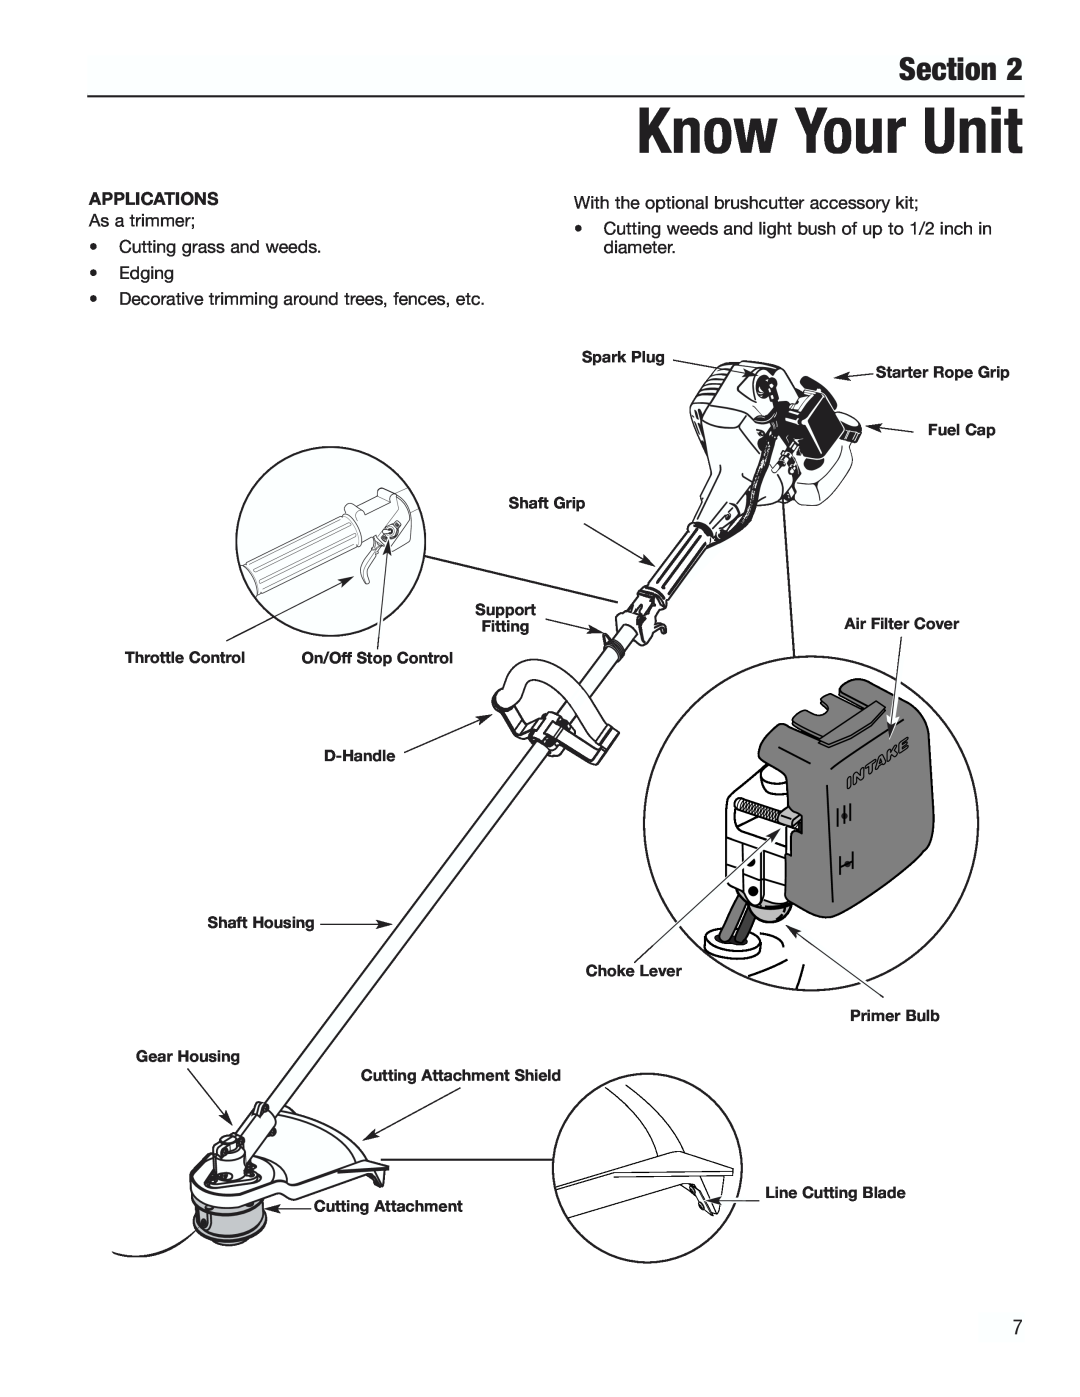 Cub Cadet CC3000 manual Know Your Unit, Section, Applications 